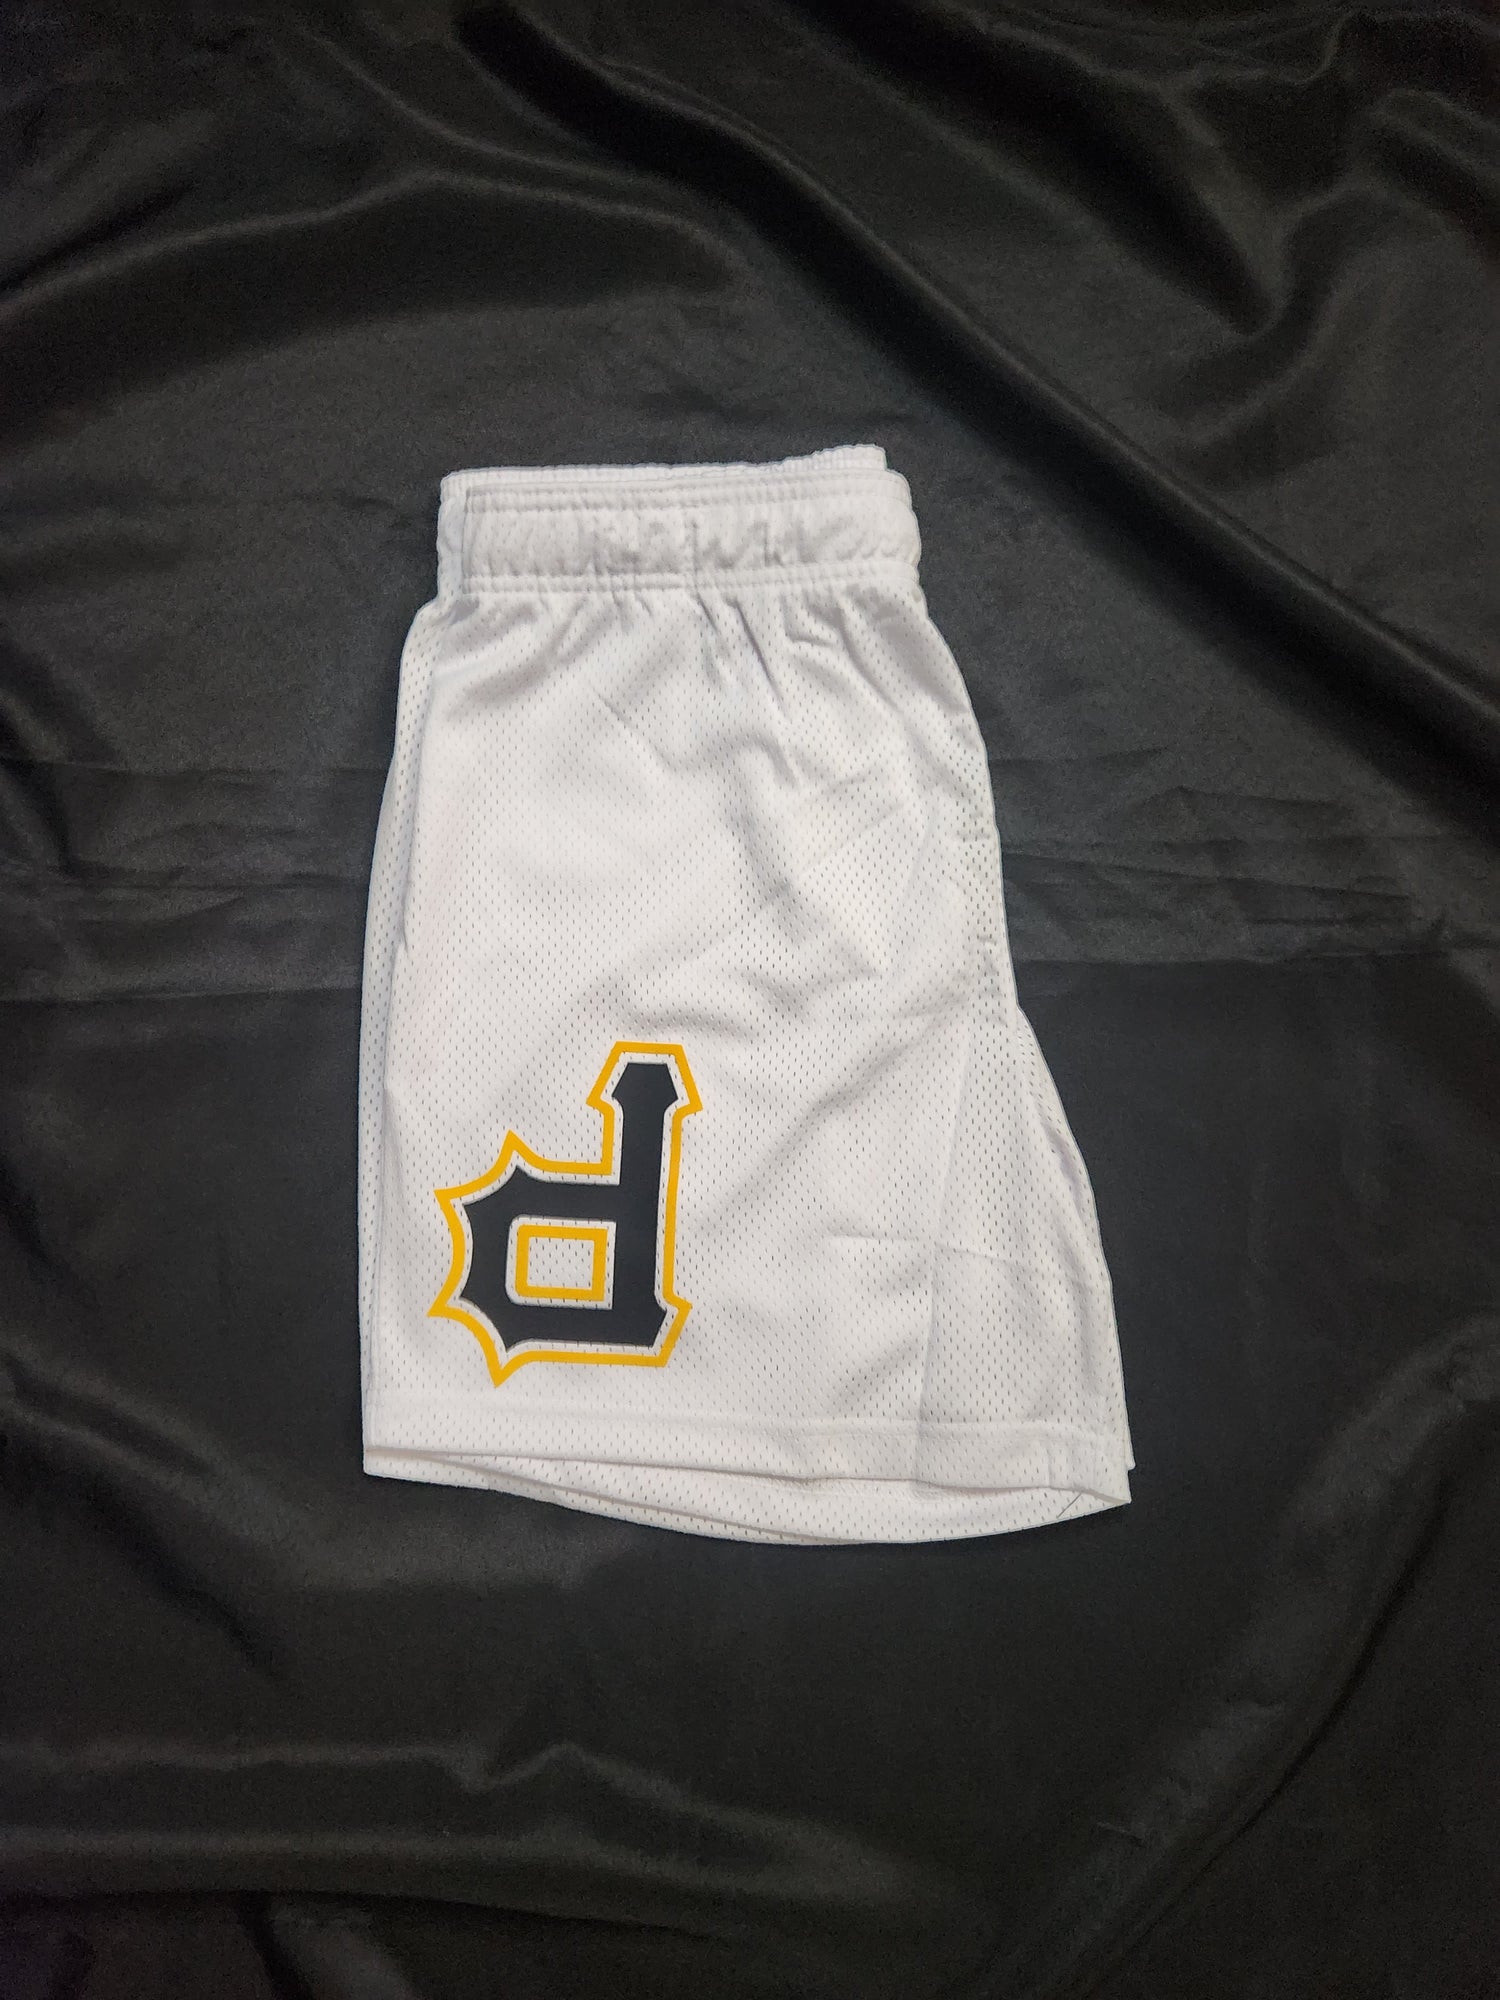 P Mesh Shorts - Centre Ave Clothing Co.